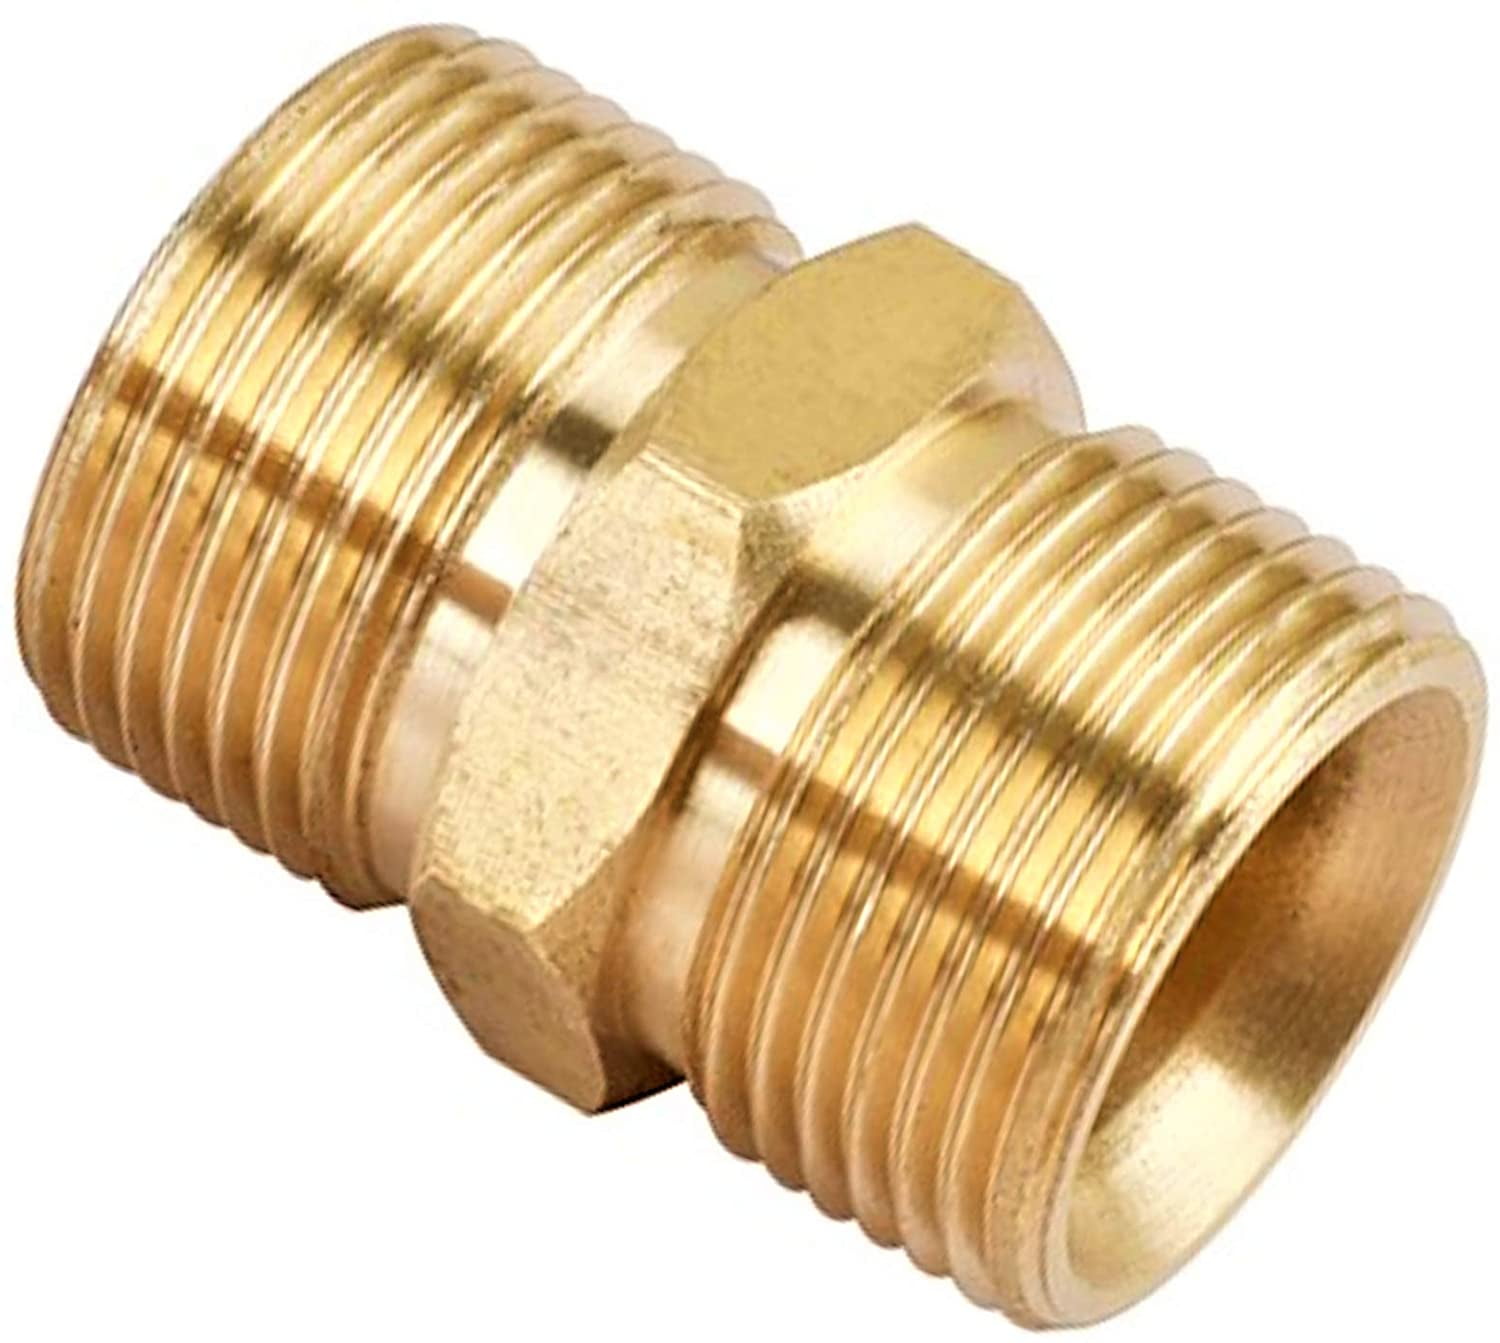 PRESSURE WASHER JET WASH ADAPTER COUPLING 22mm FEMALE 